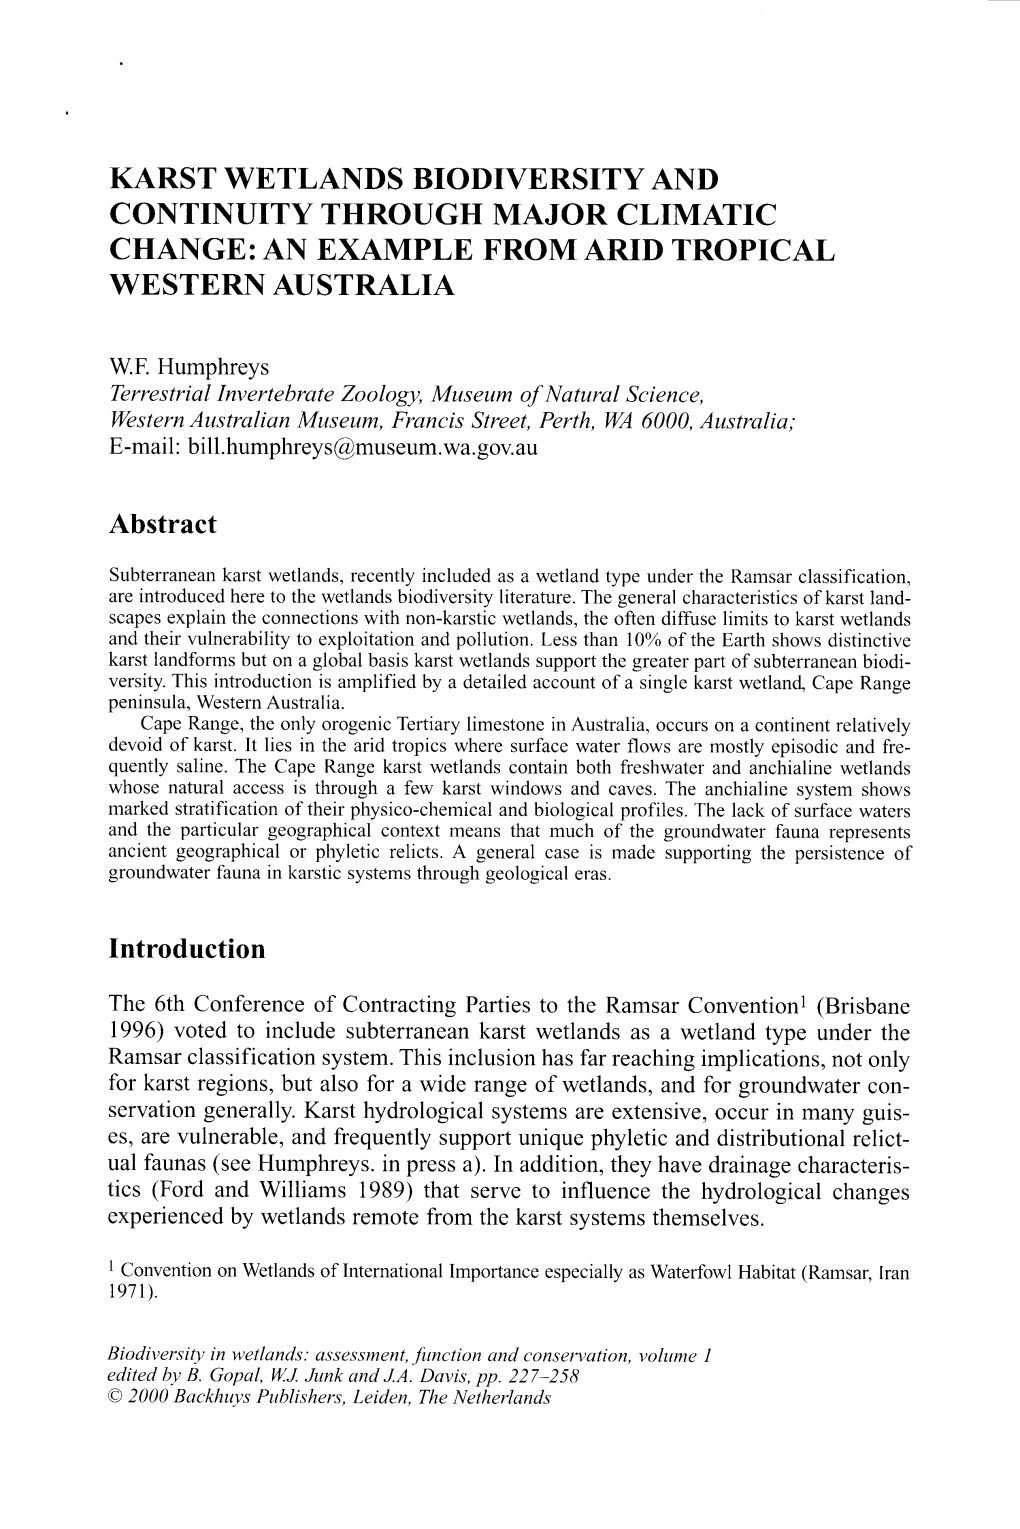 Karst Wetlands Biodiversity Ani) Continuity Through Major Climatic Change: an Example from Arid Tropical Western Australia